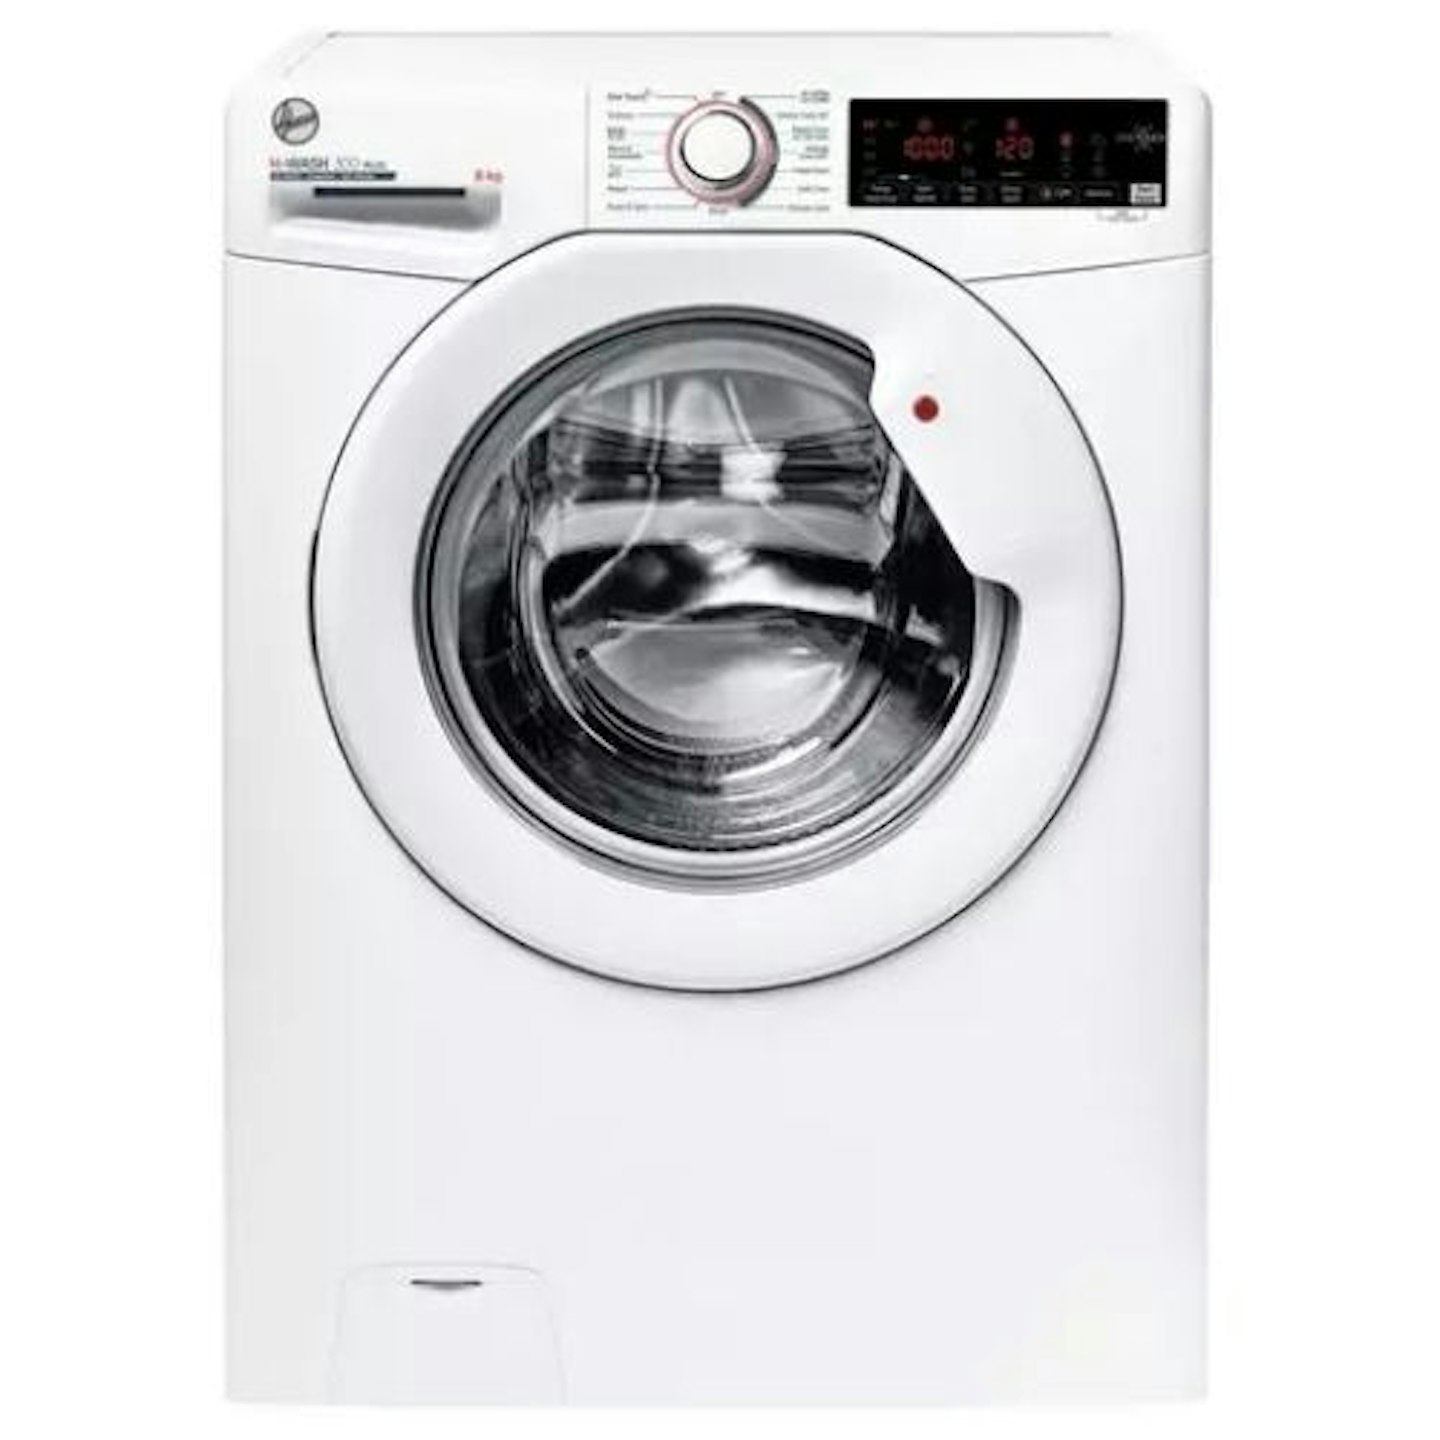 HOOVER H-Wash 300 H3W 68TME NFC 8 kg 1600 Spin Washing Machine